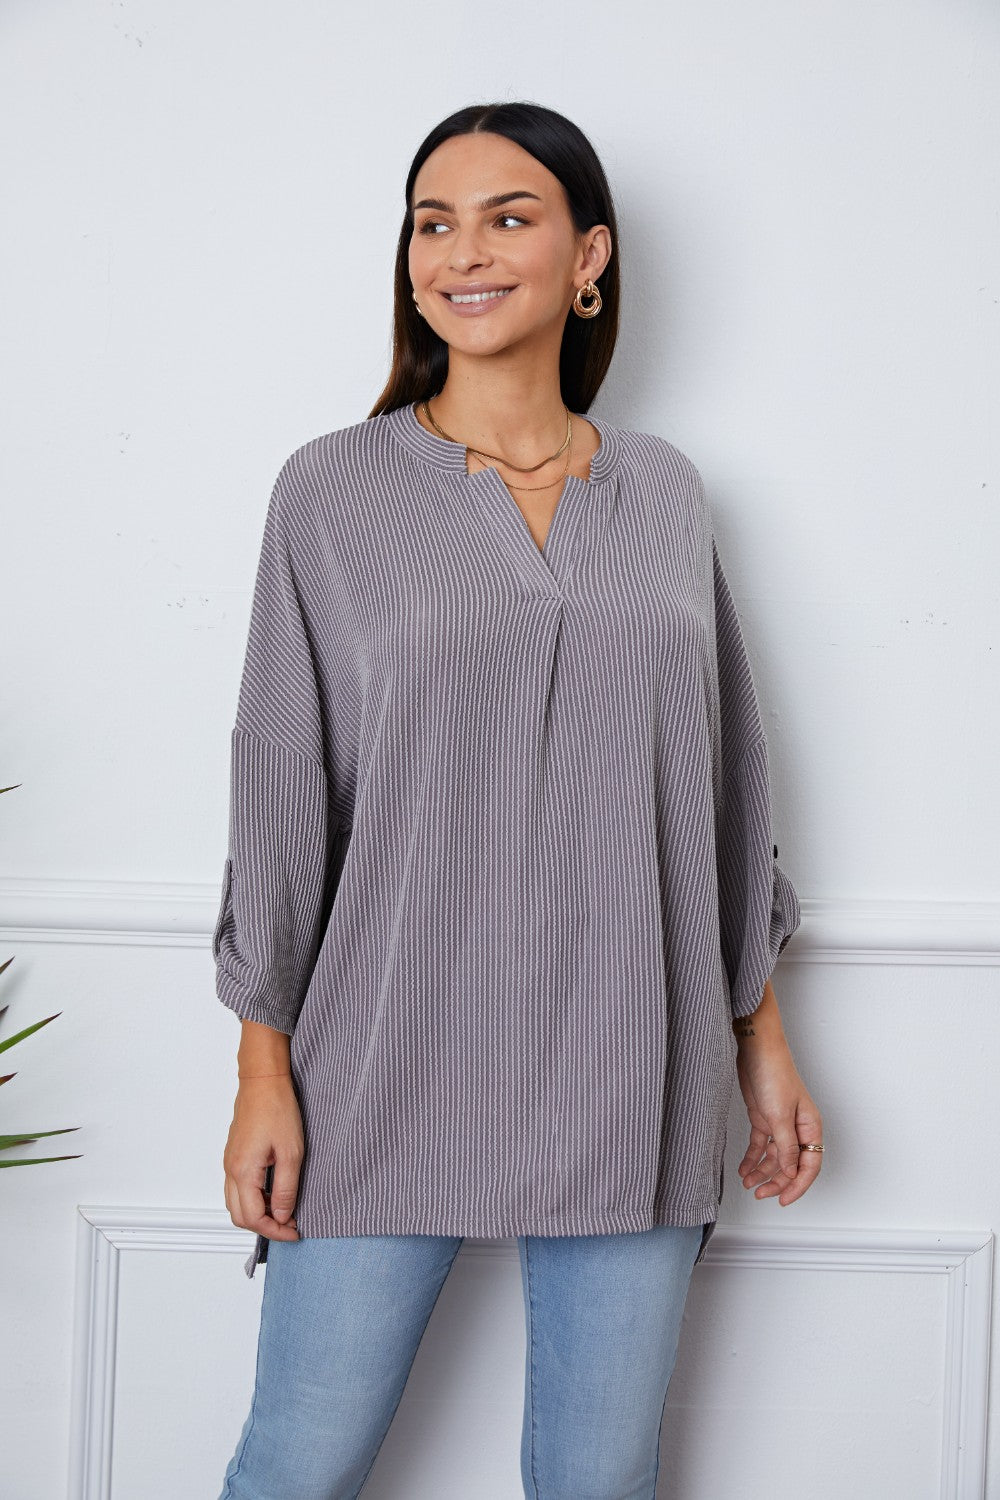 Grey Long Sleeve Shirt Women's Fashion Notched Roll-Tab Sleeve Casual Blouse